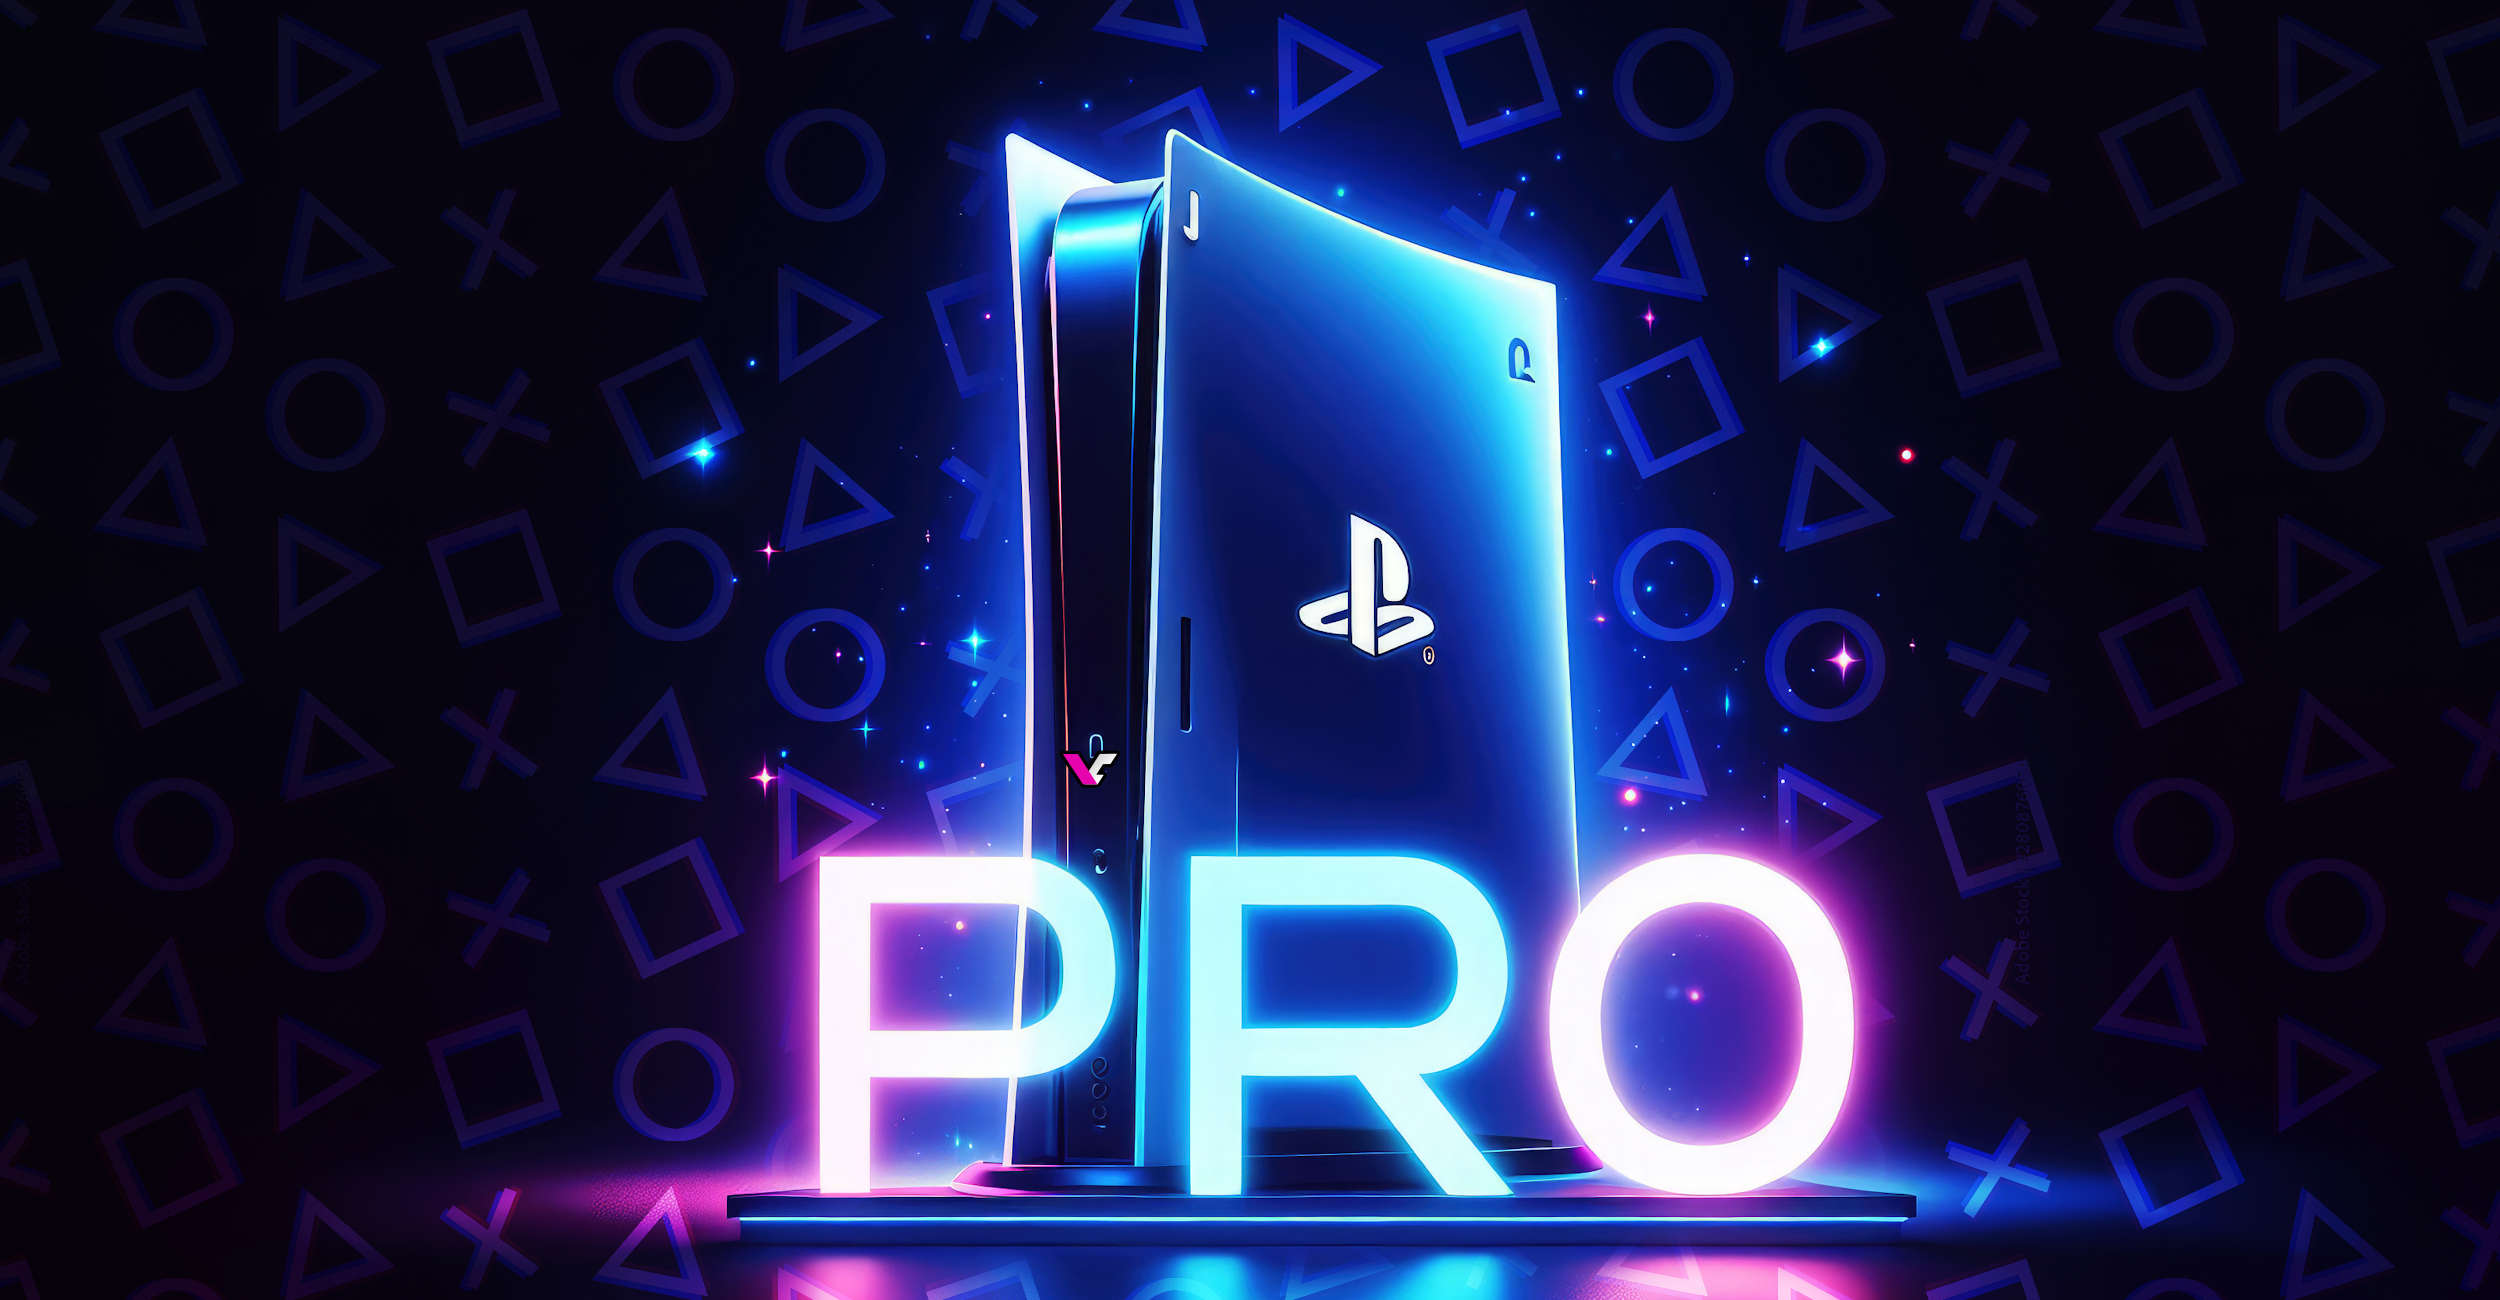 Sony PS5 Pro specs Sony’s Project Trinity, aka PlayStation 5 Pro. The new details come from the Kepler and ResetEra forums, where alleged specs for the next-gen console have been released. The system known as PS5 Pro has been the subject of speculation for several months now. However, it is anticipated that the complete specifications […]